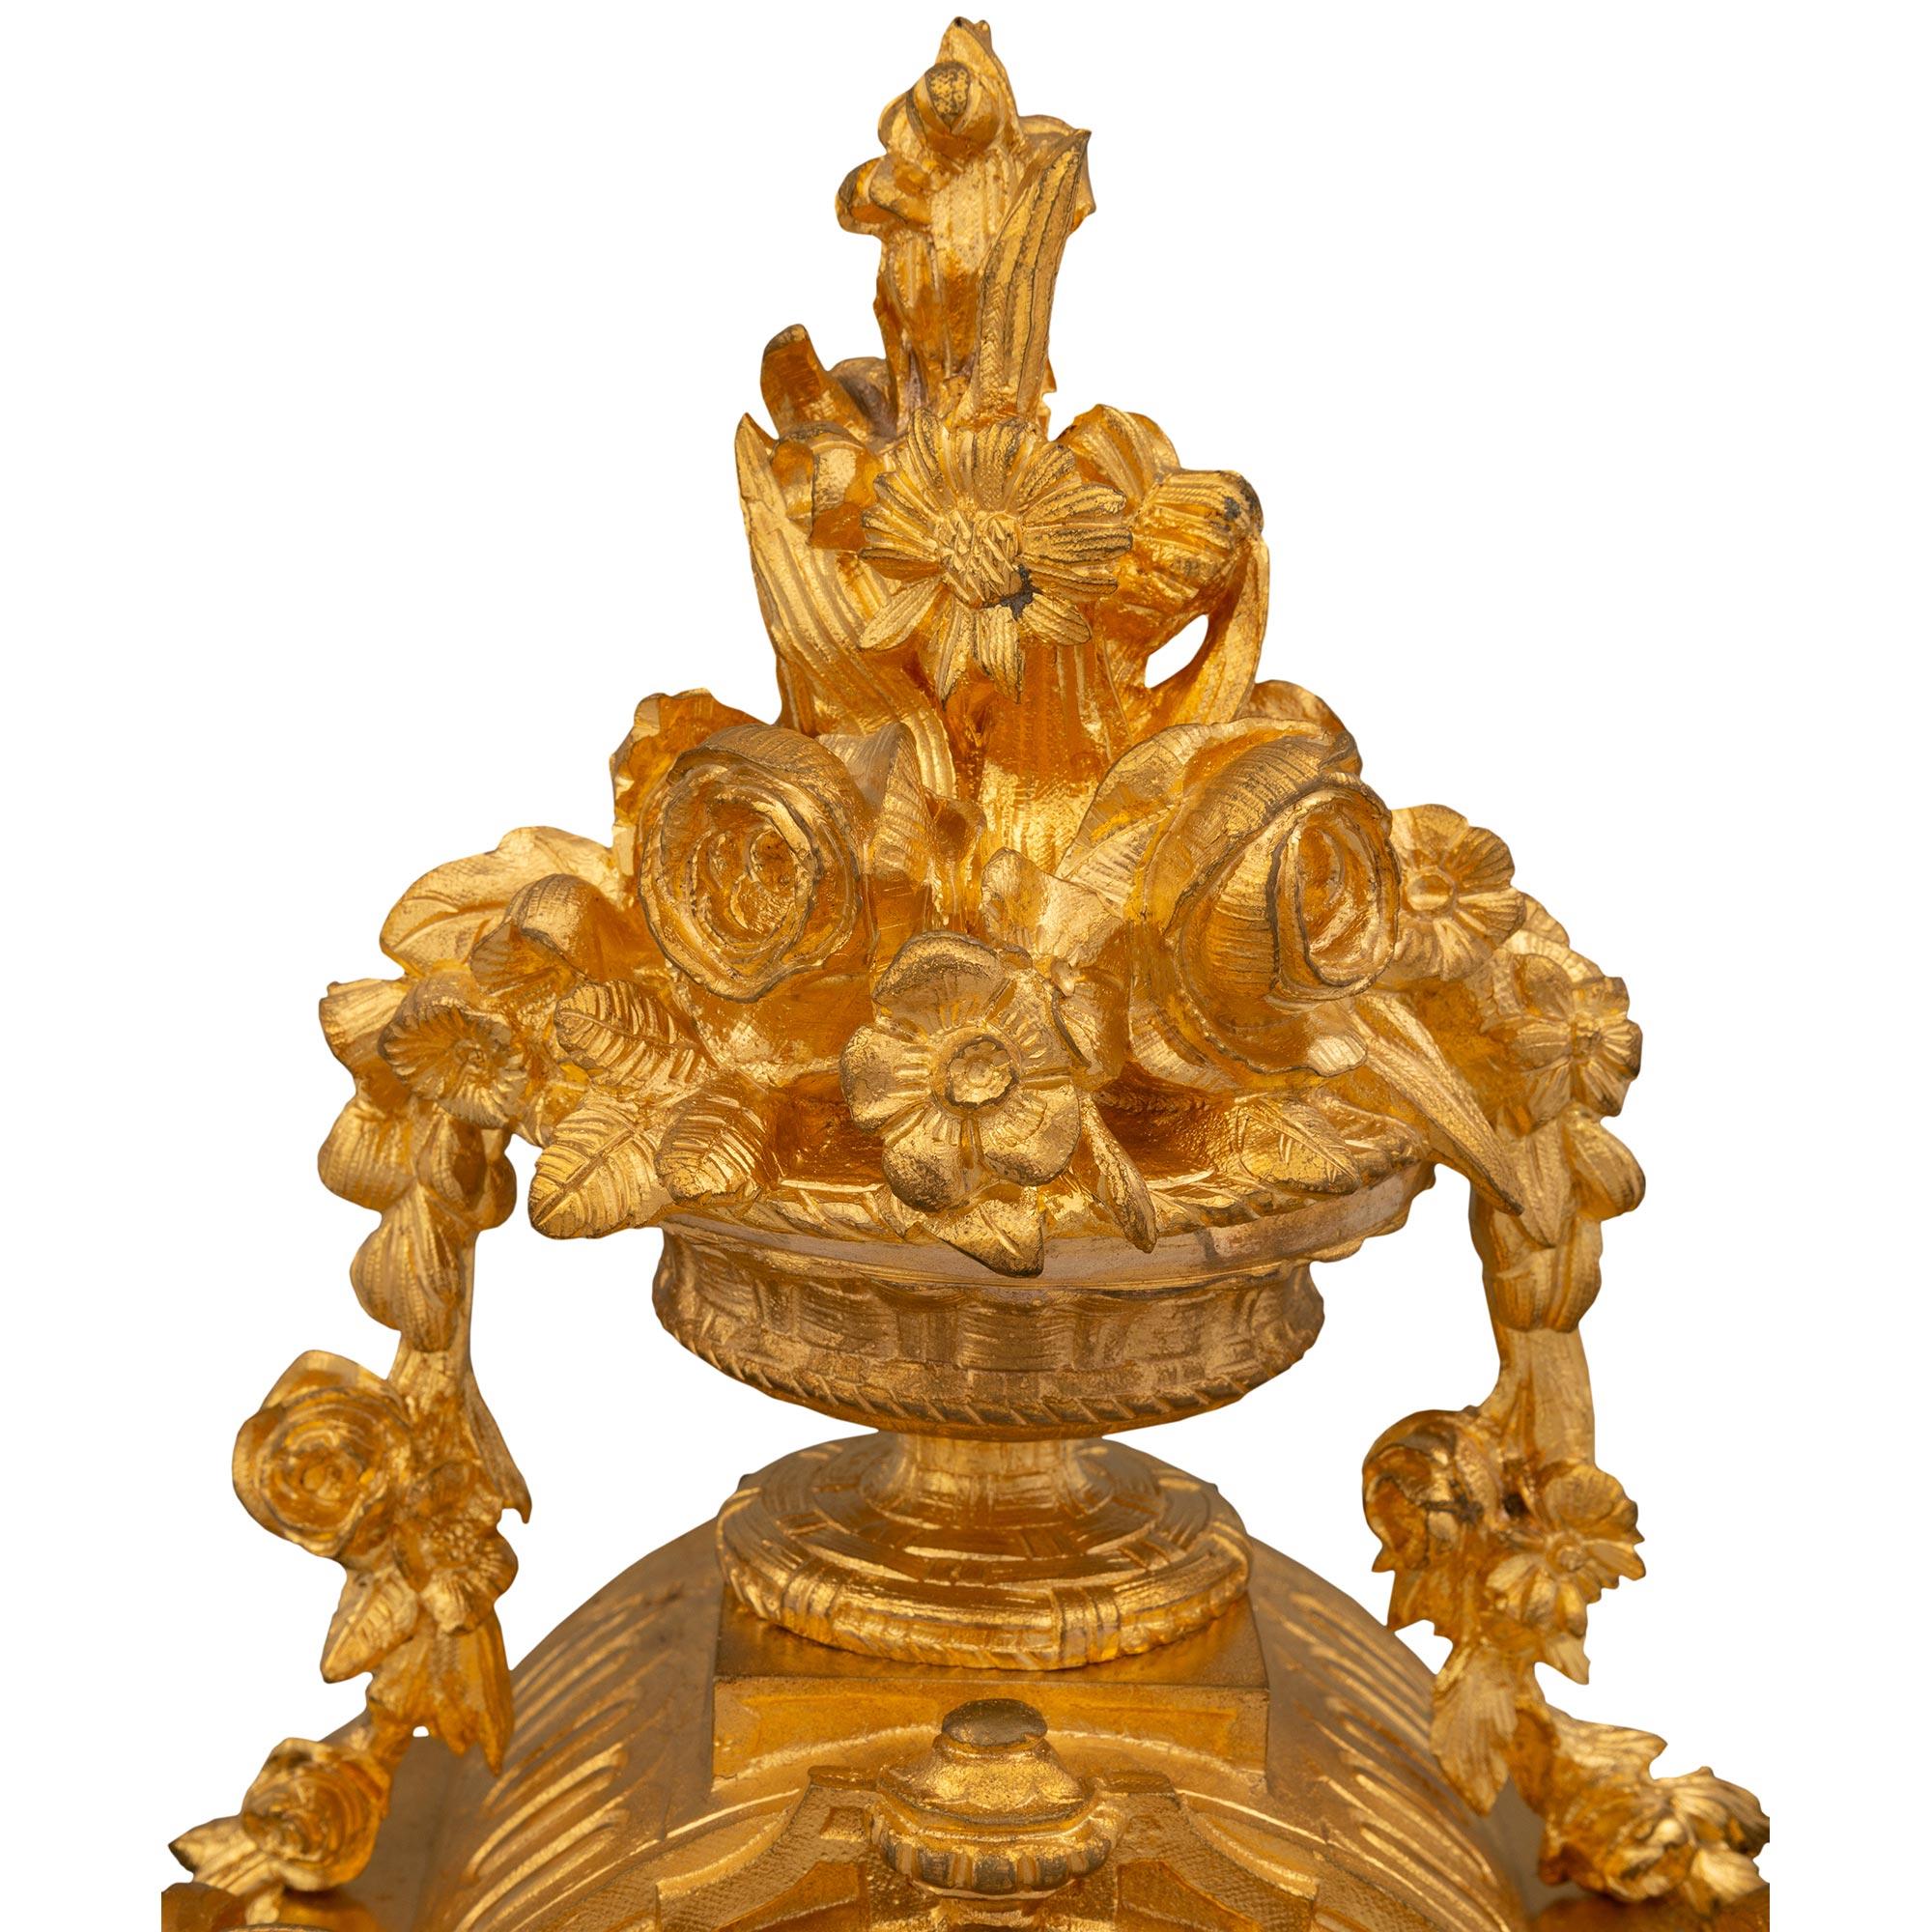 French 19th Century Louis XVI Style Sèvres Porcelain and Ormolu Clock In Good Condition For Sale In West Palm Beach, FL